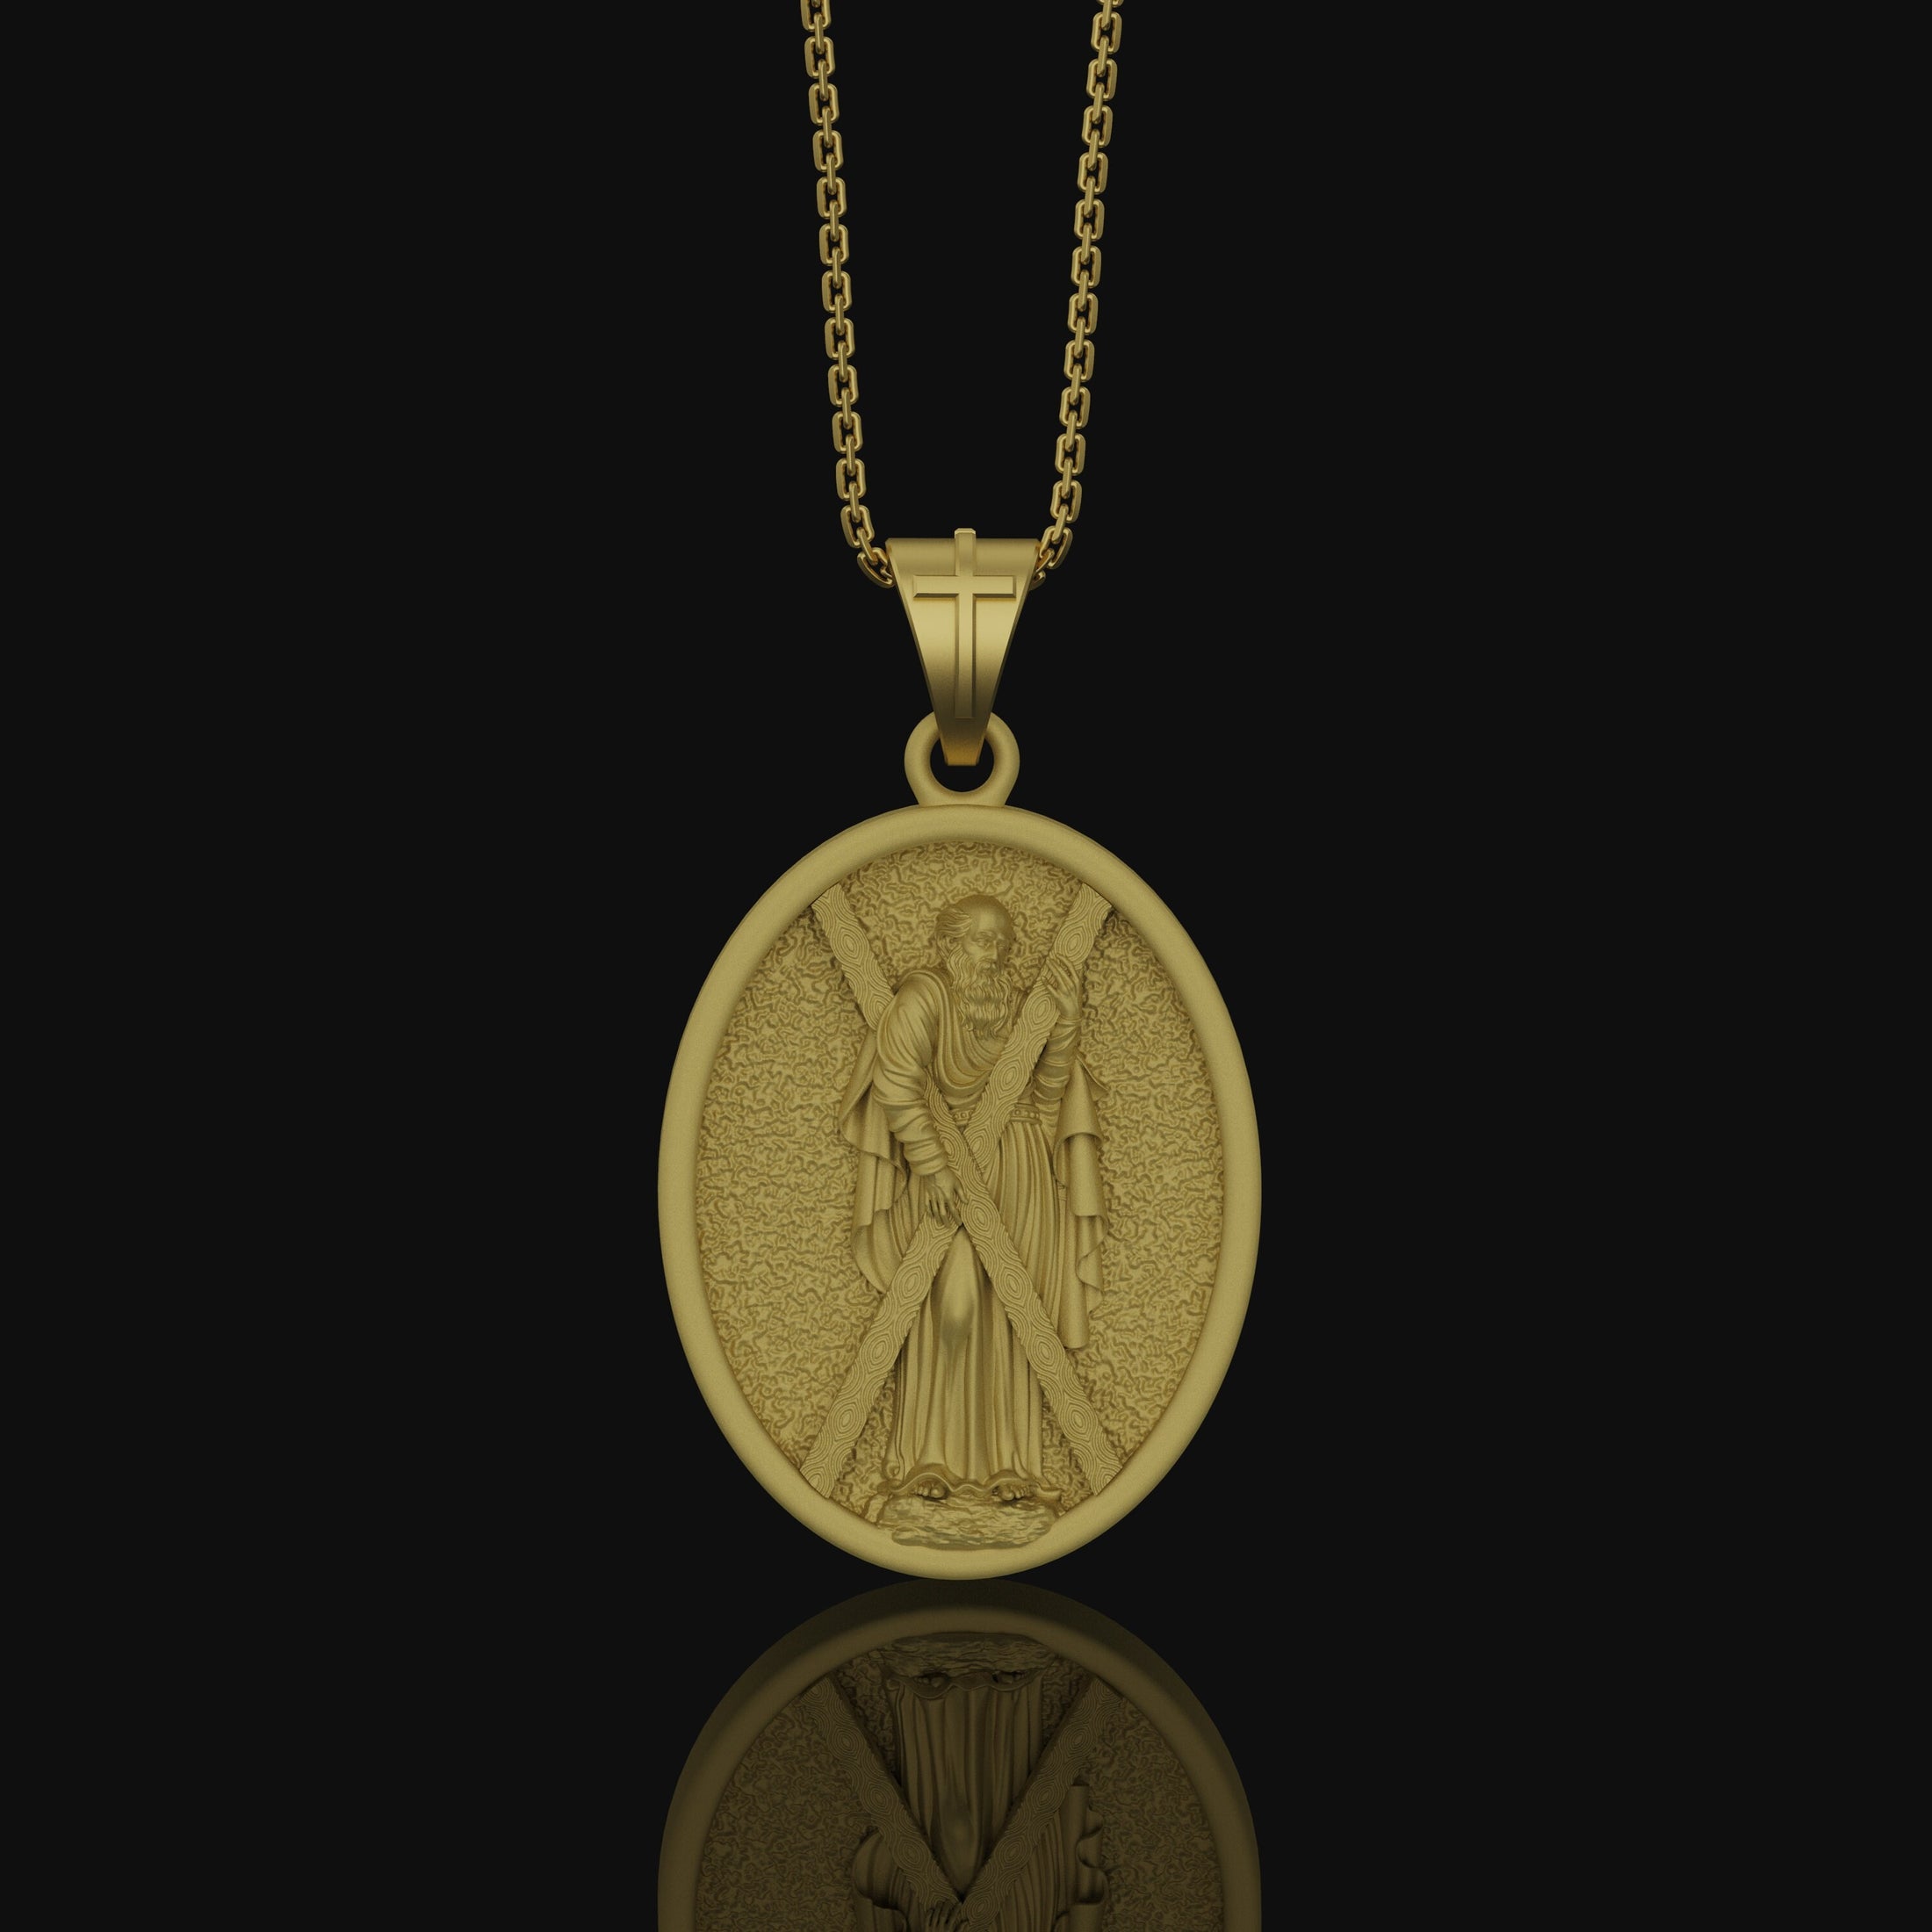 St Andrew Medal, Patron Saint Medal, Andrew The Apostle, Religious Medals Jewelry, Catholic Necklace, Confirmation Gift Gold Matte